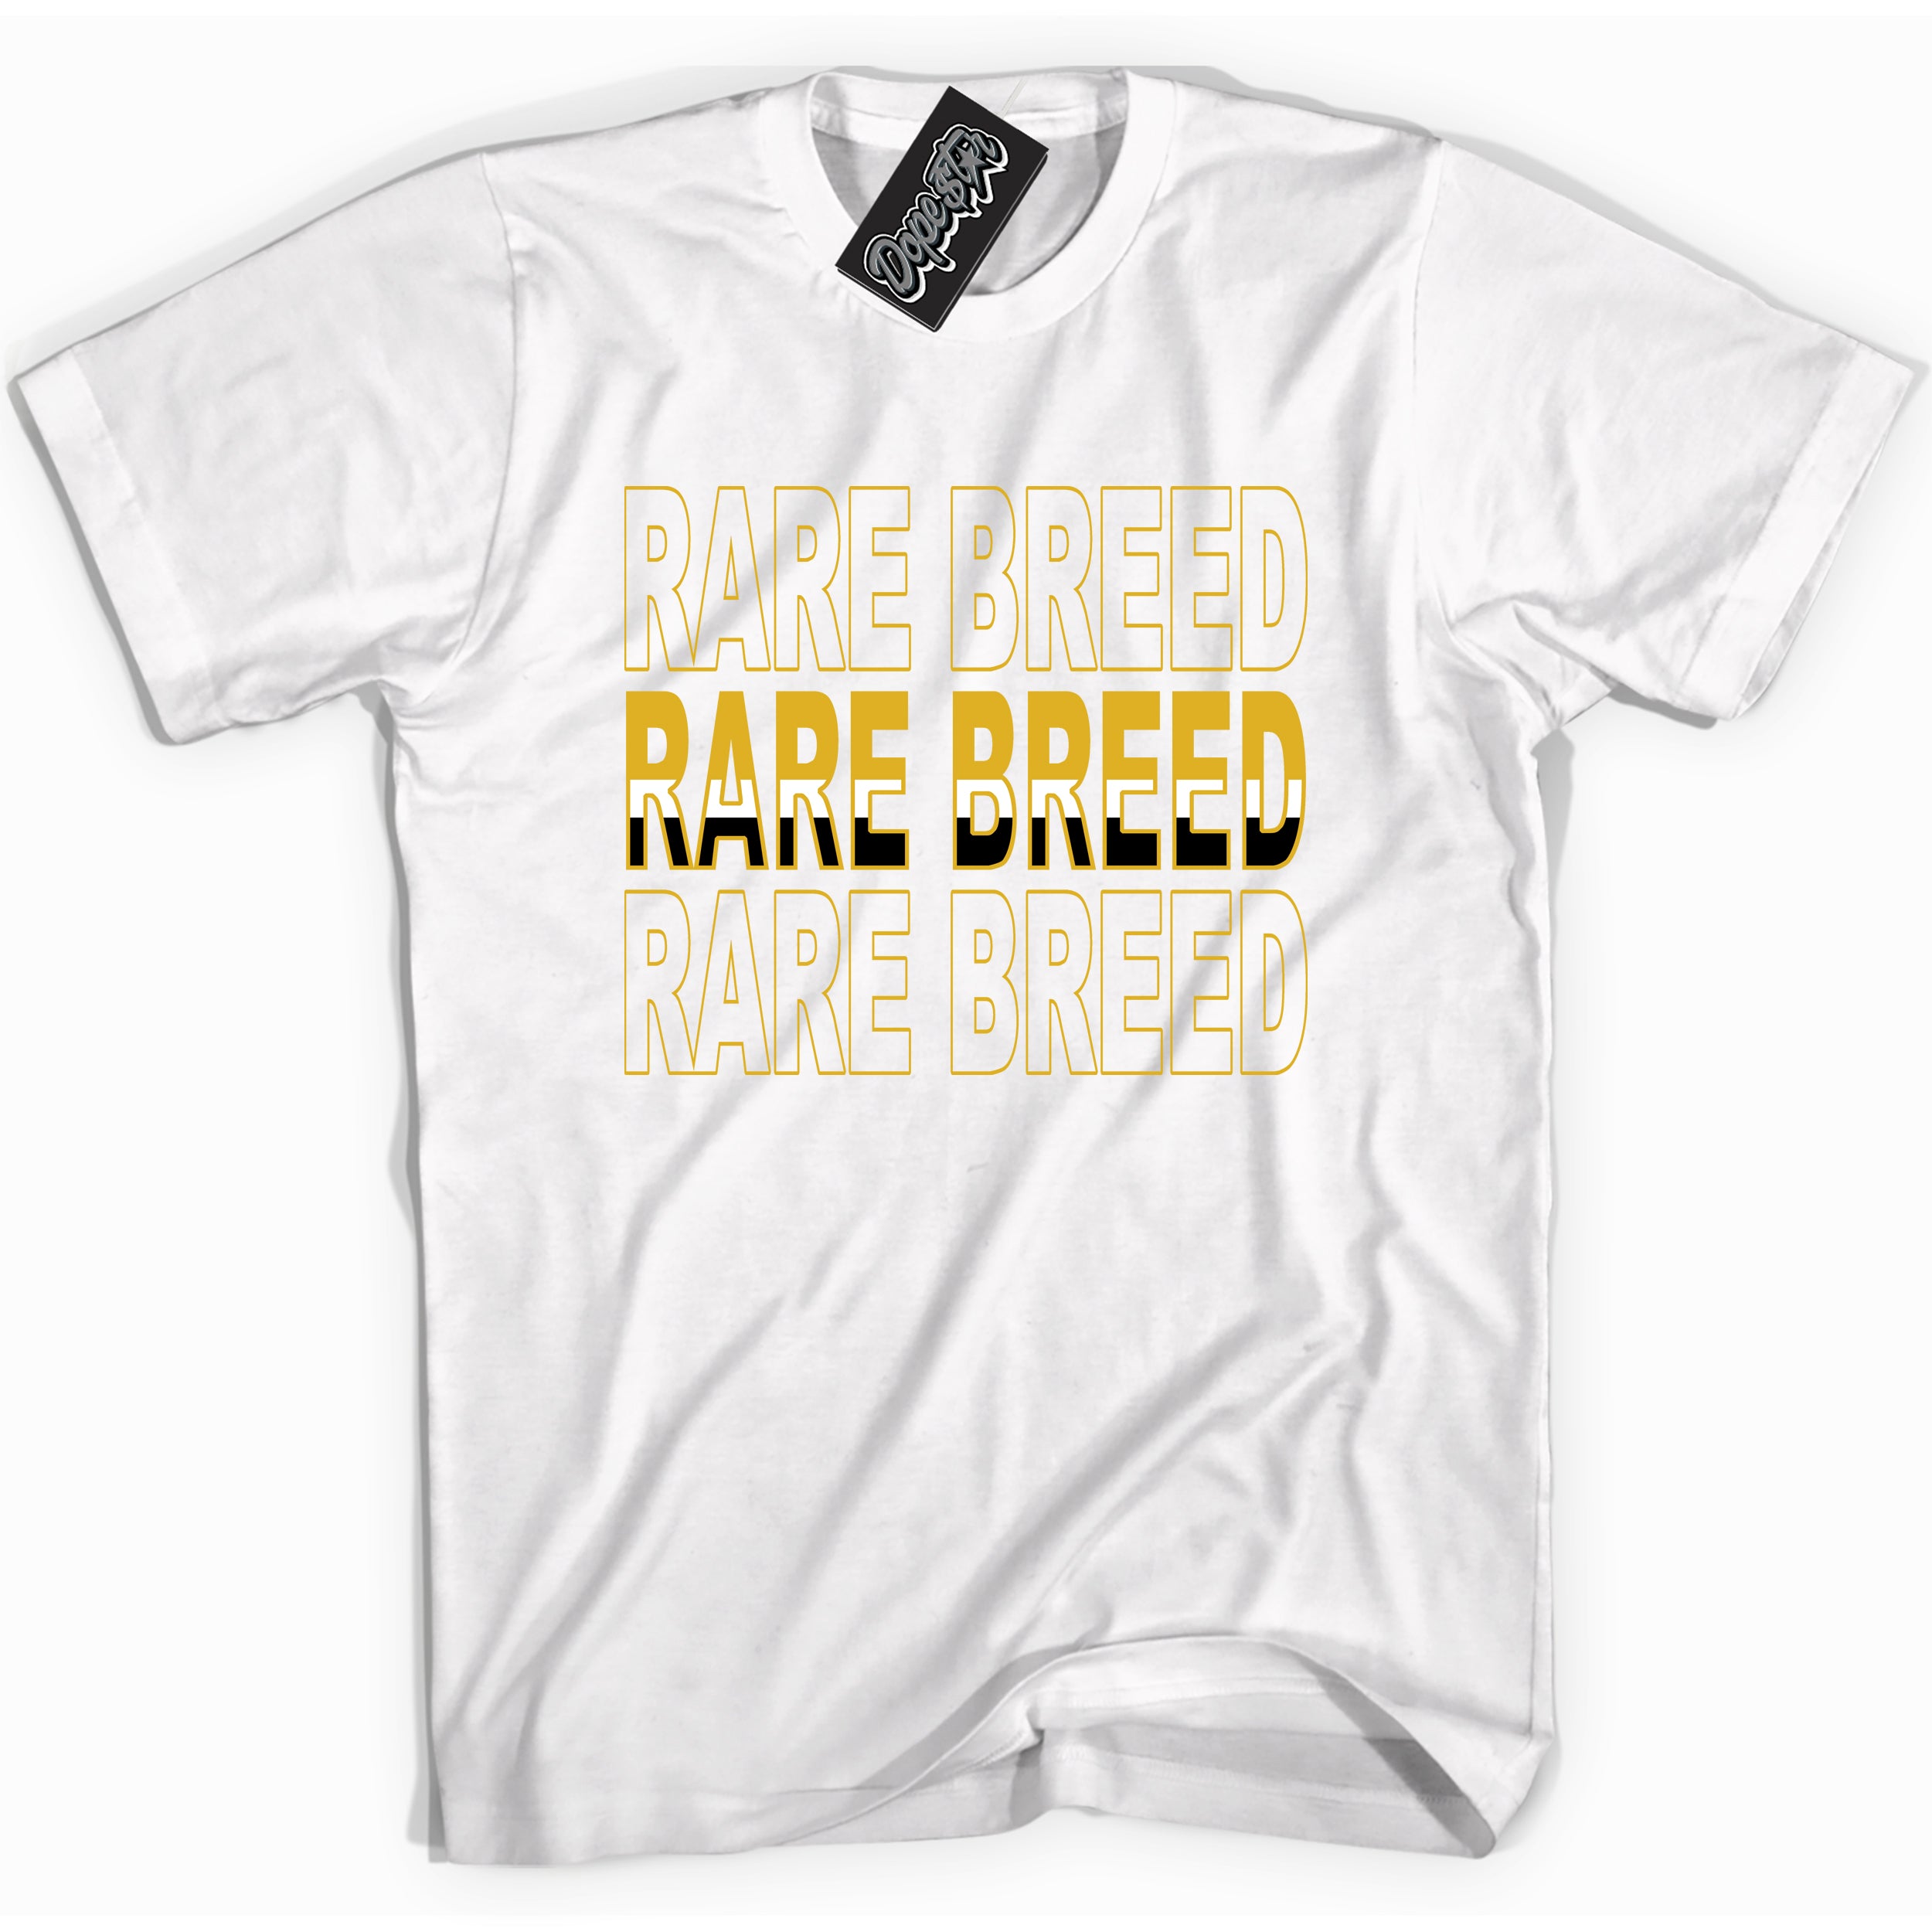 Cool White Shirt with “ Rare Breed” design that perfectly matches Yellow Ochre 6s Sneakers.